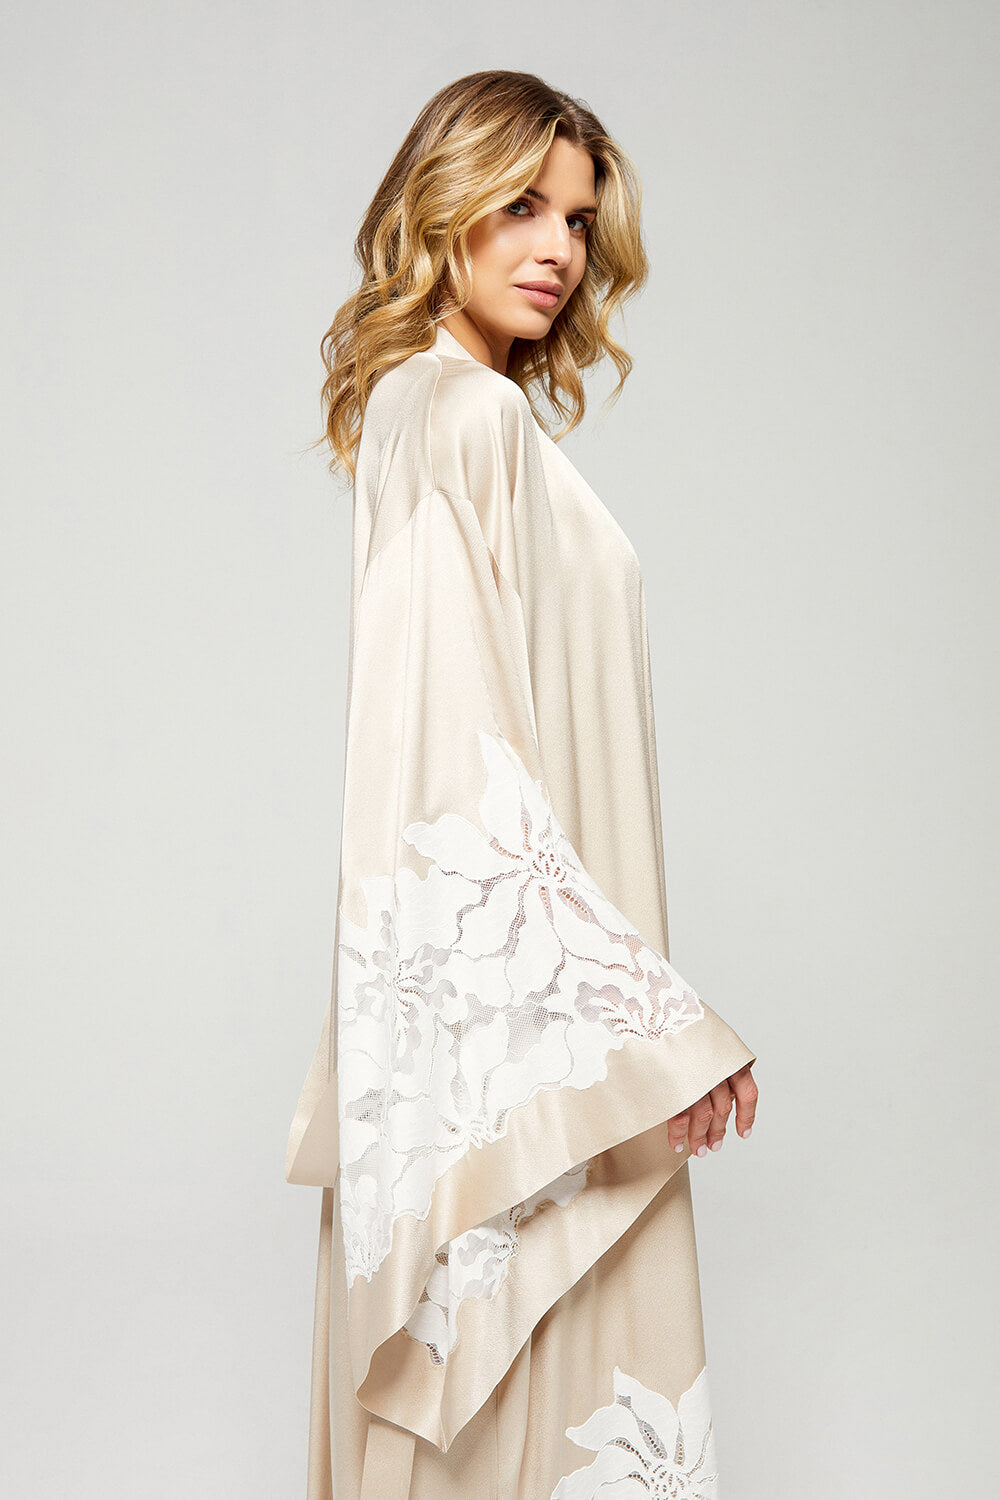 Argos Long Rayon Trimmed with Lace Robe Set - Beige